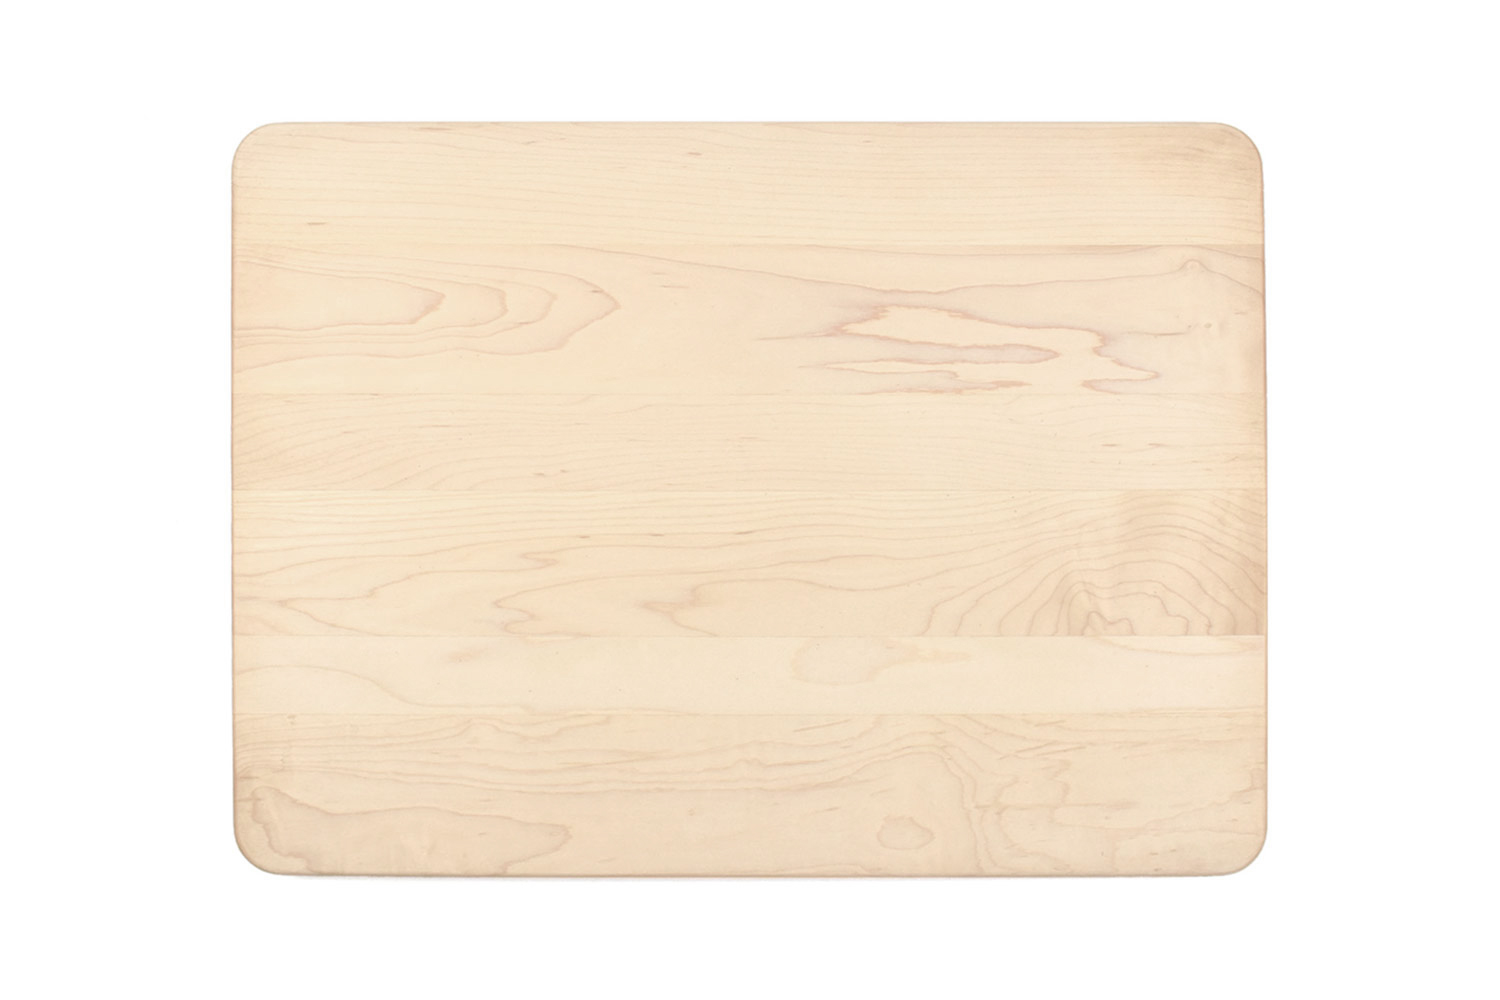 Cutting board with rounded corners